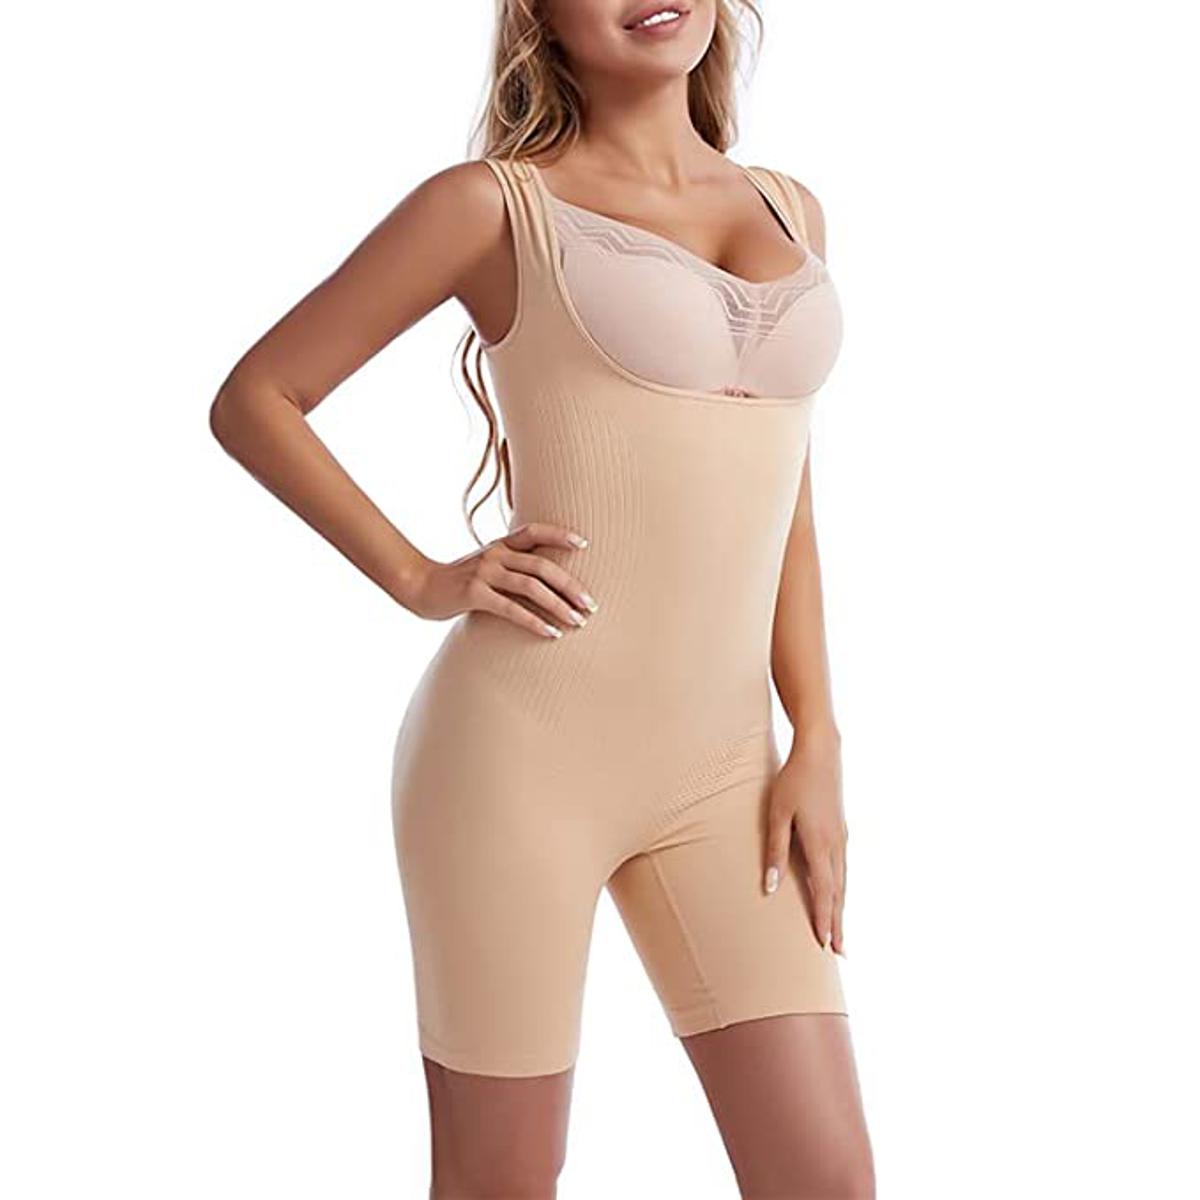 TZsecrets Women Full Body Shaper Cotton Spandex Blend Body Shaper wear for  Thighs, Back, Tummy - Stretchable Tummy Control with Full Body Shaping and